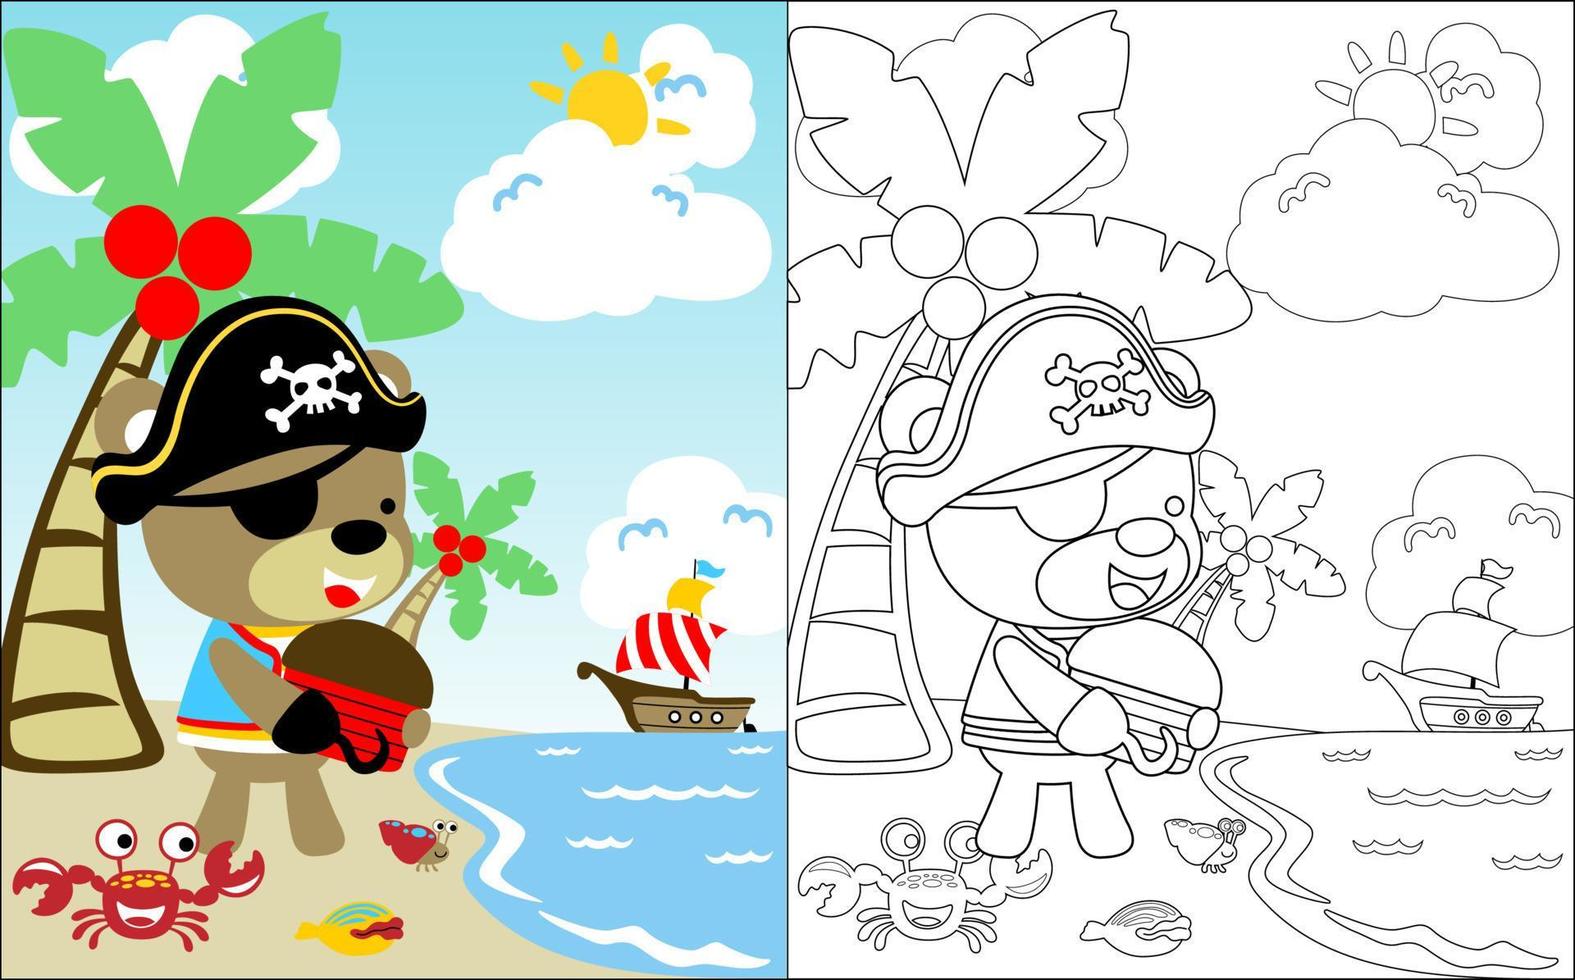 Coloring book vector of cute bear in pirate costume carrying treasure chest in the beach with little marine animals